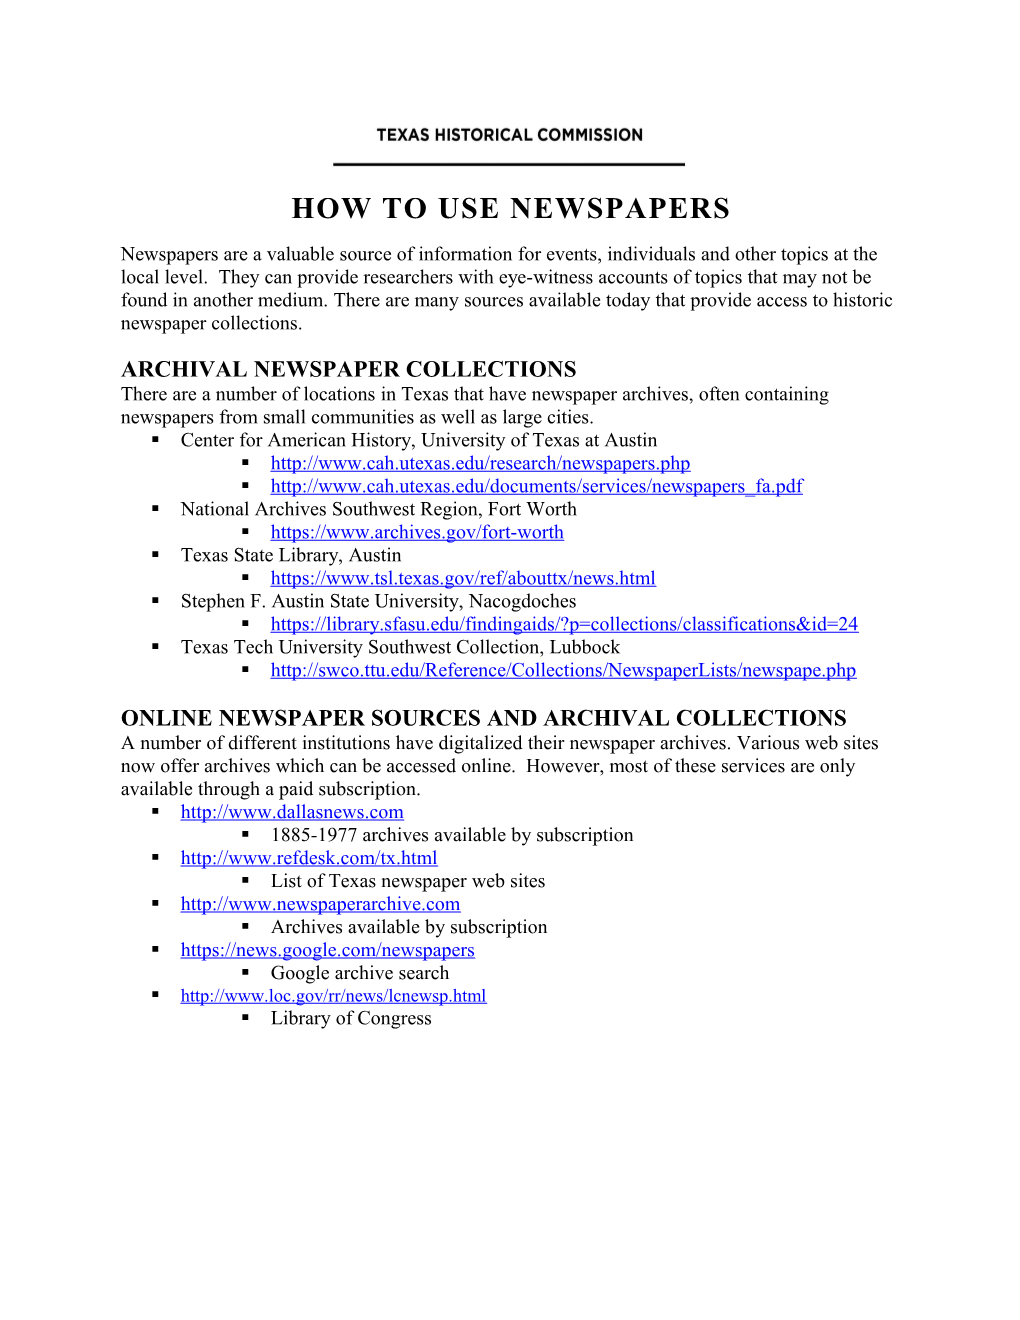 How to Use NEWSPAPERS